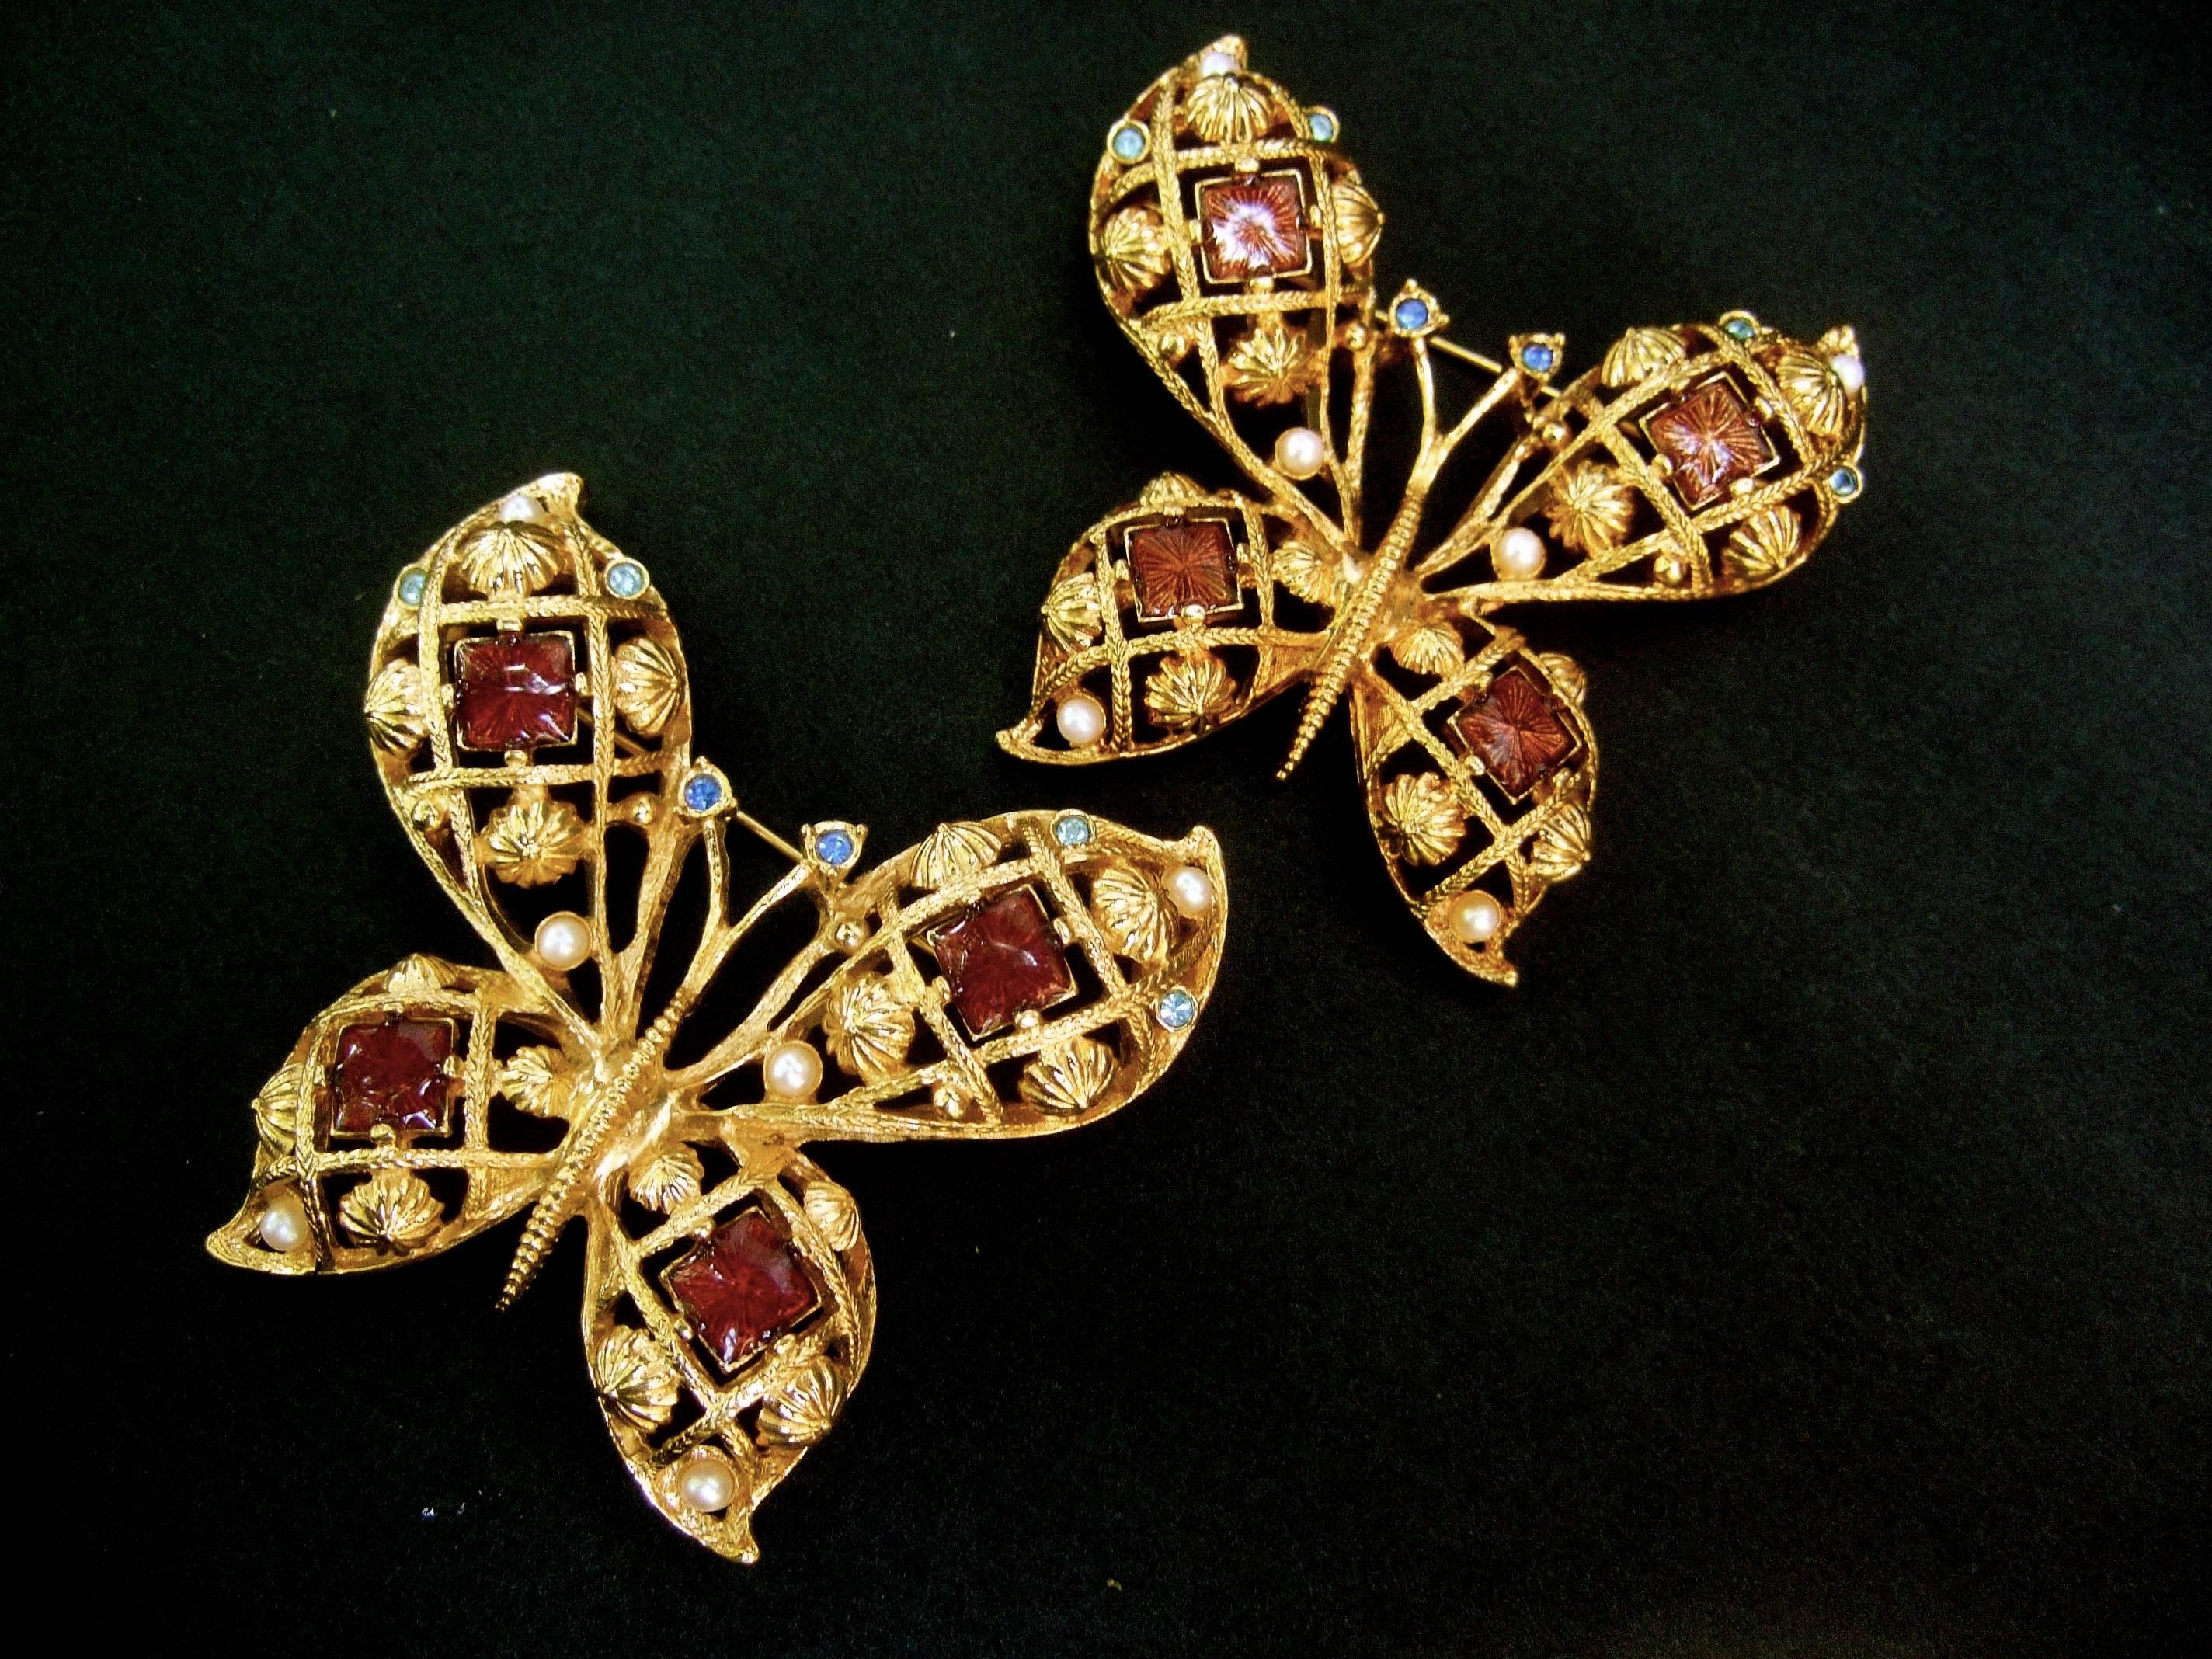 Pair of jeweled enamel gilt metal butterfly brooches c 1980s
The elegant gold metal butterflies are embellished 
with tiles of shiny enamel in muted burgundy 
and light mocha brown 

One of the brooches is designed with muted burgundy 
and the other